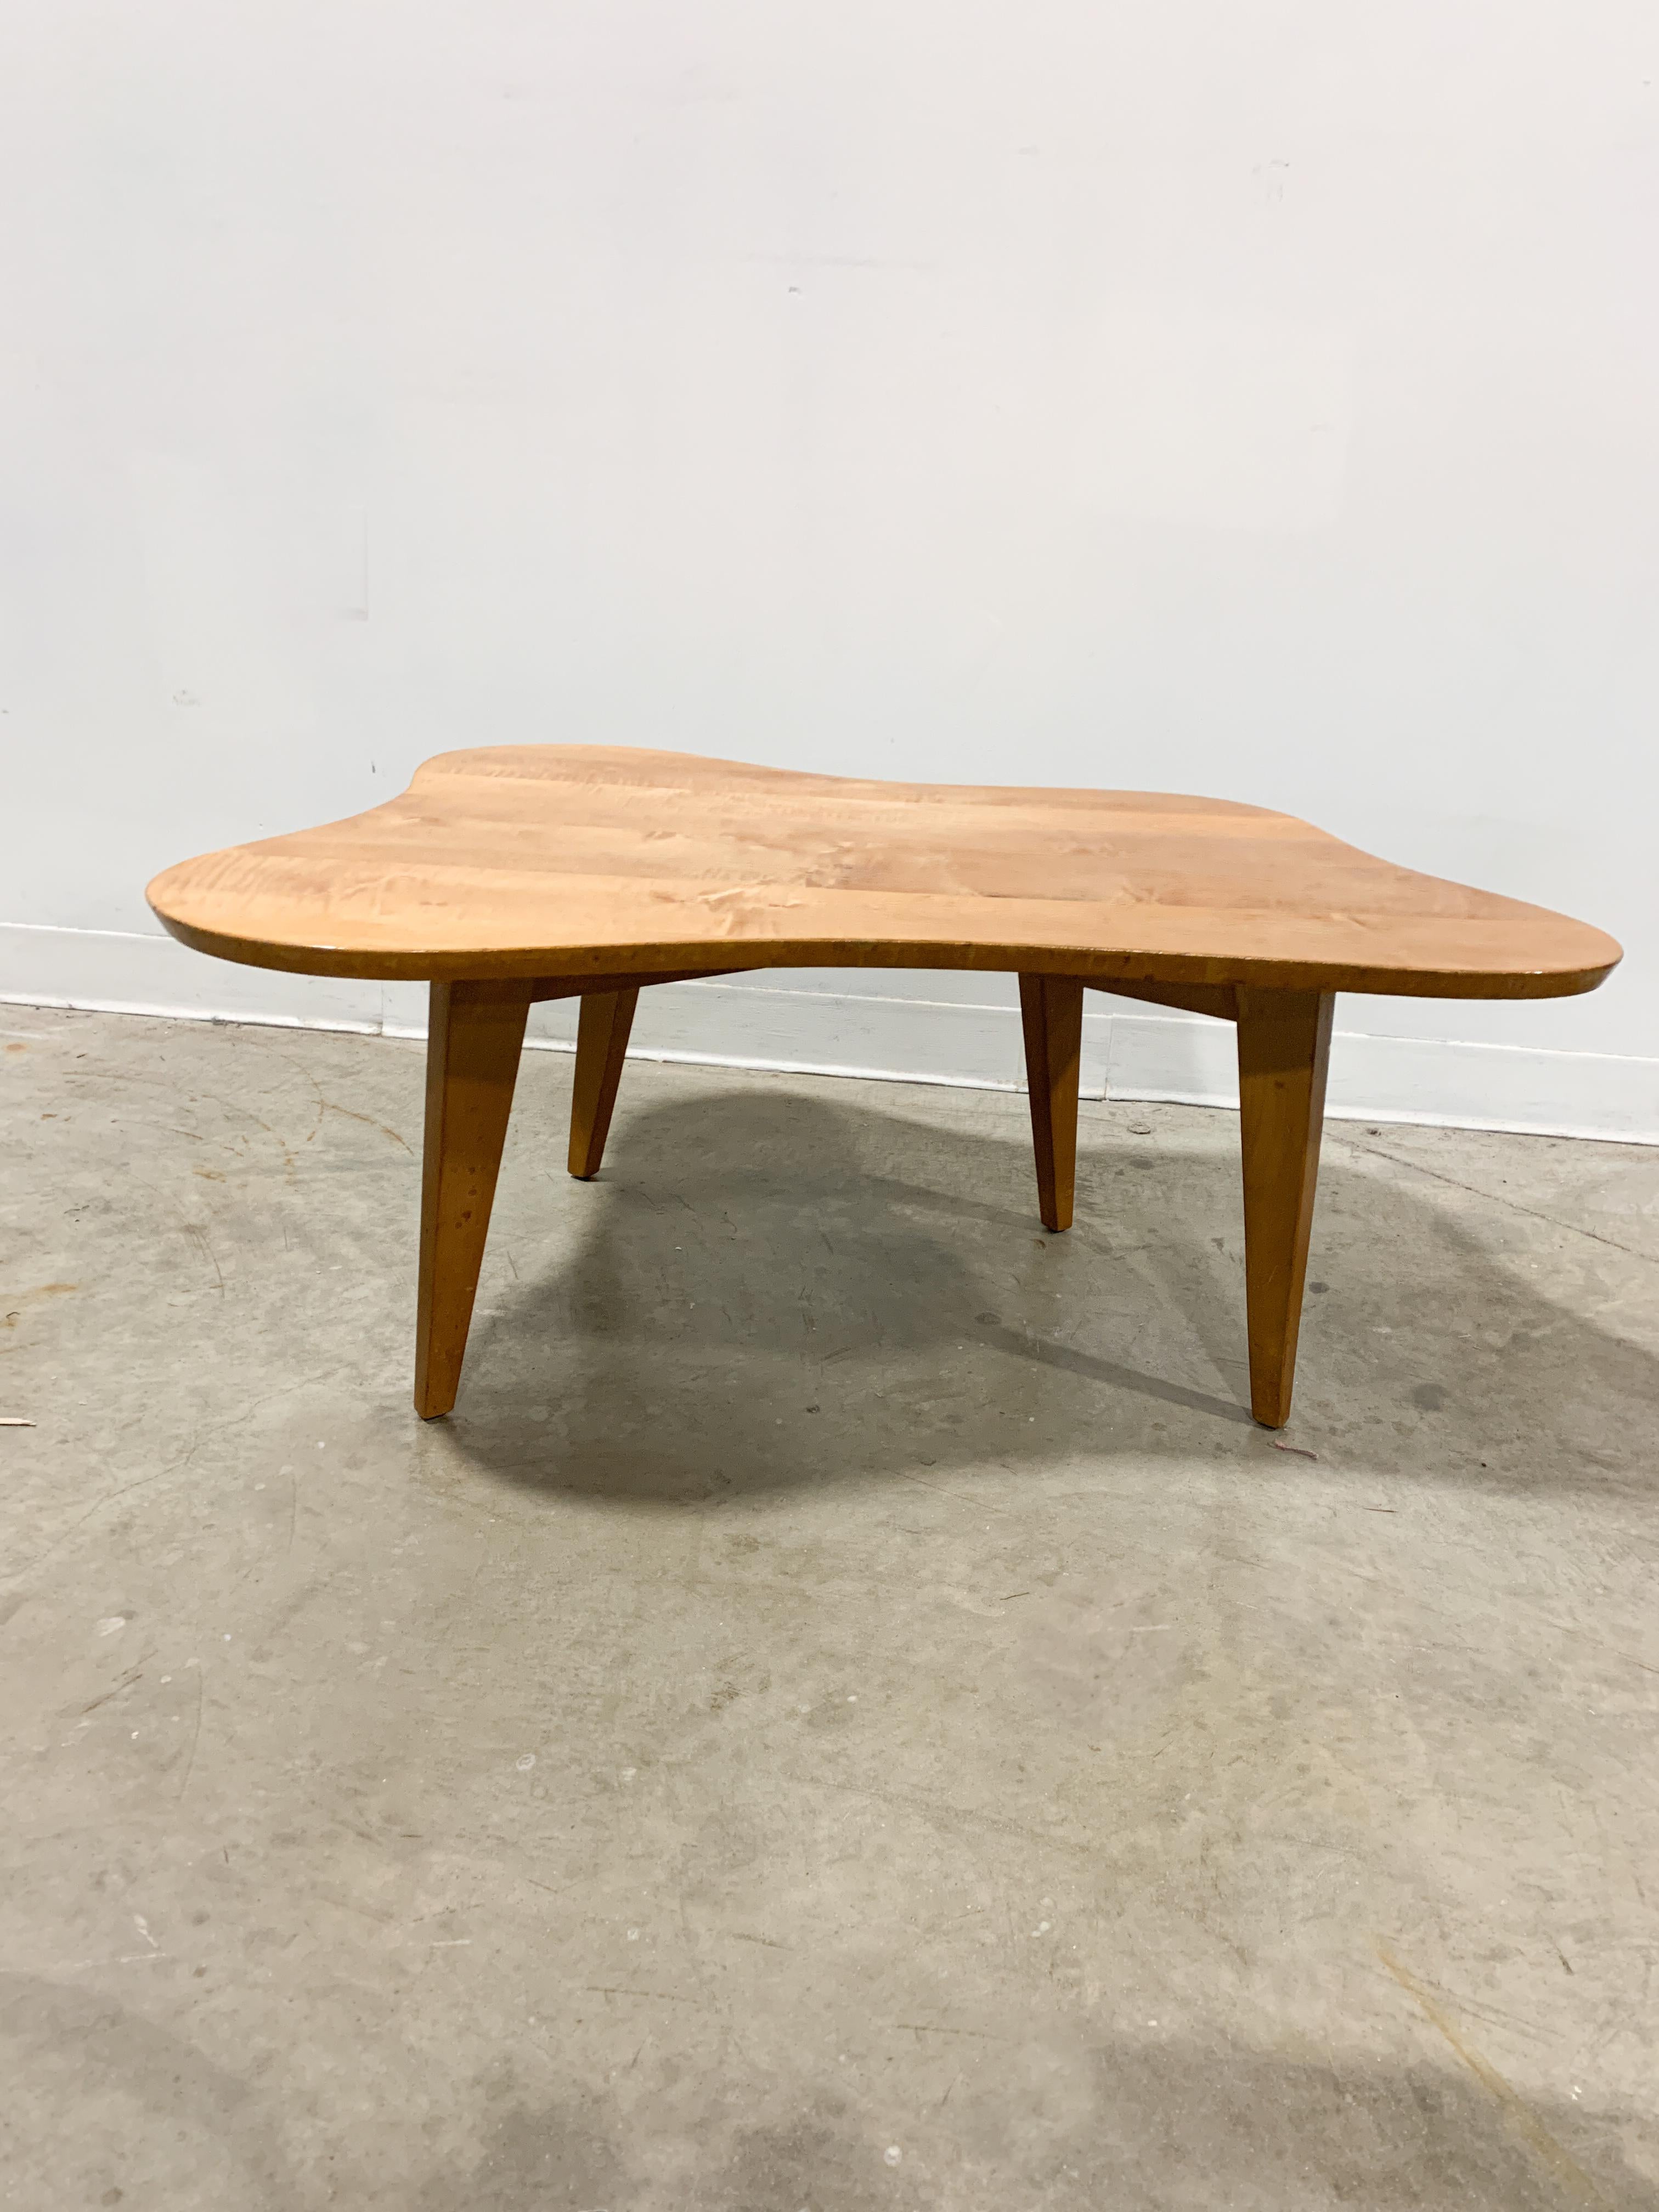 20th Century Jens Risom 600 Cloud Table for Knoll, 1940s